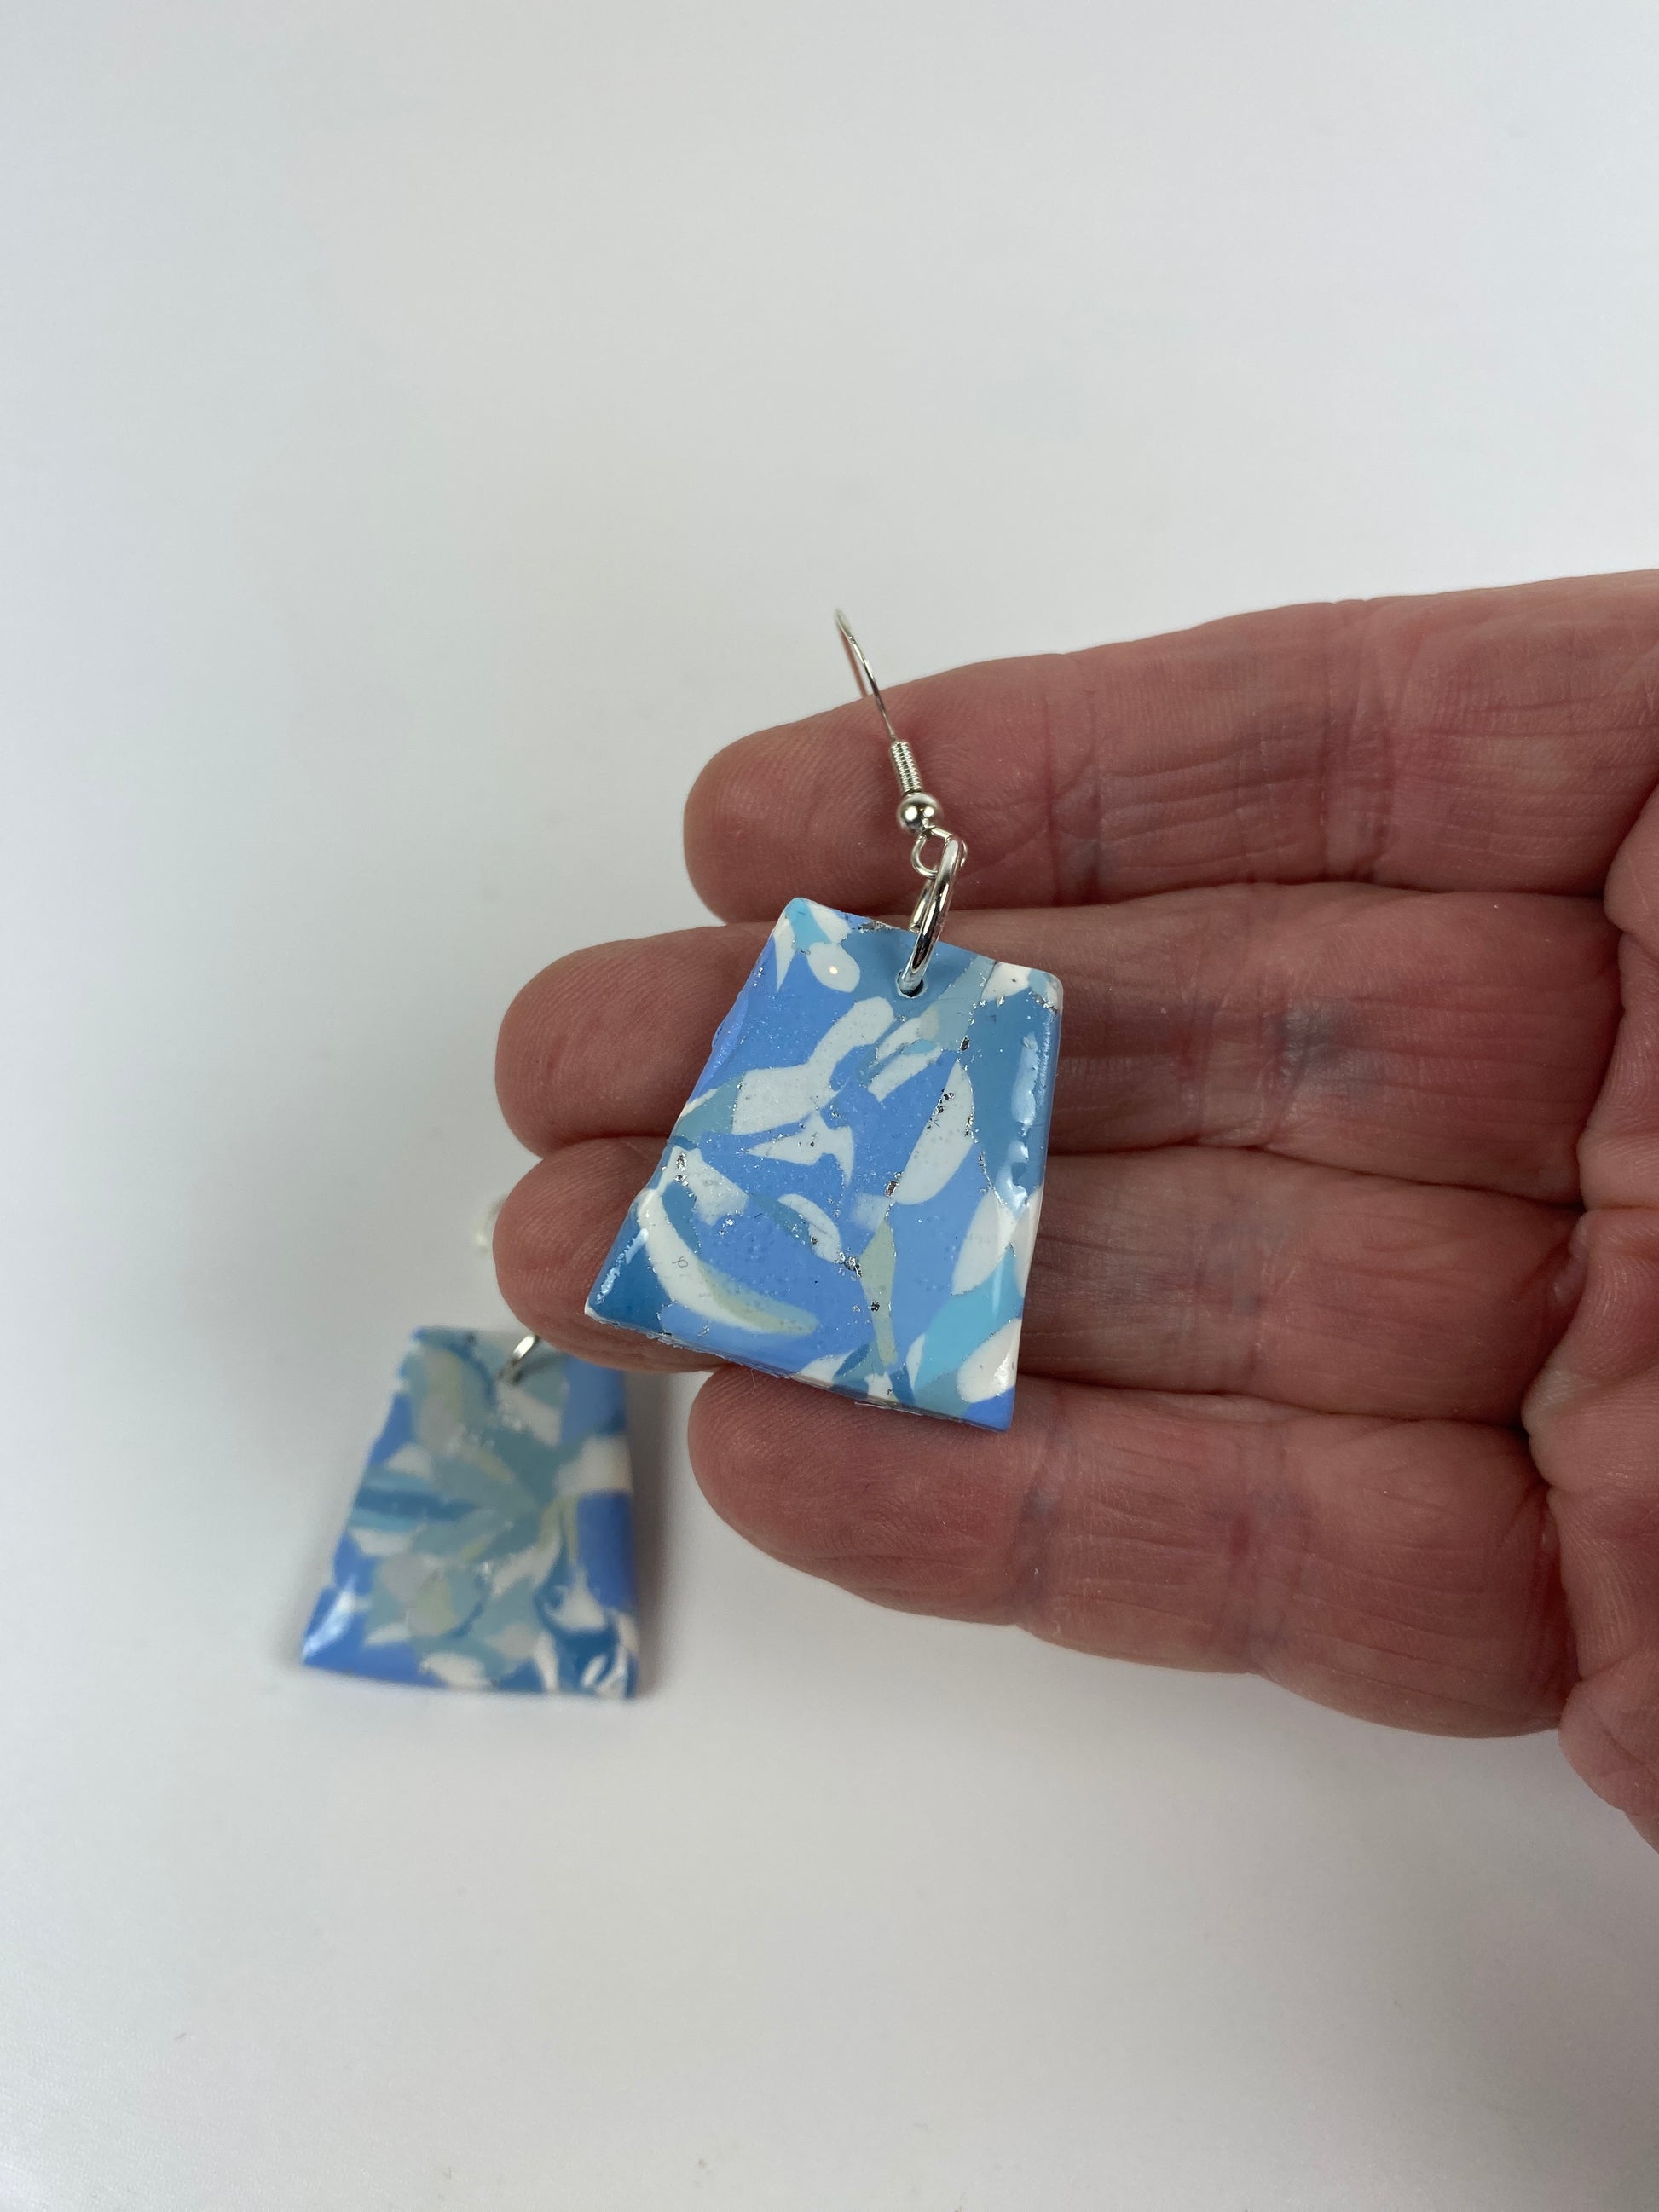 Moody Blue Handmade Polymer Clay Dangle Trapezoid Earrings hand held for size reference